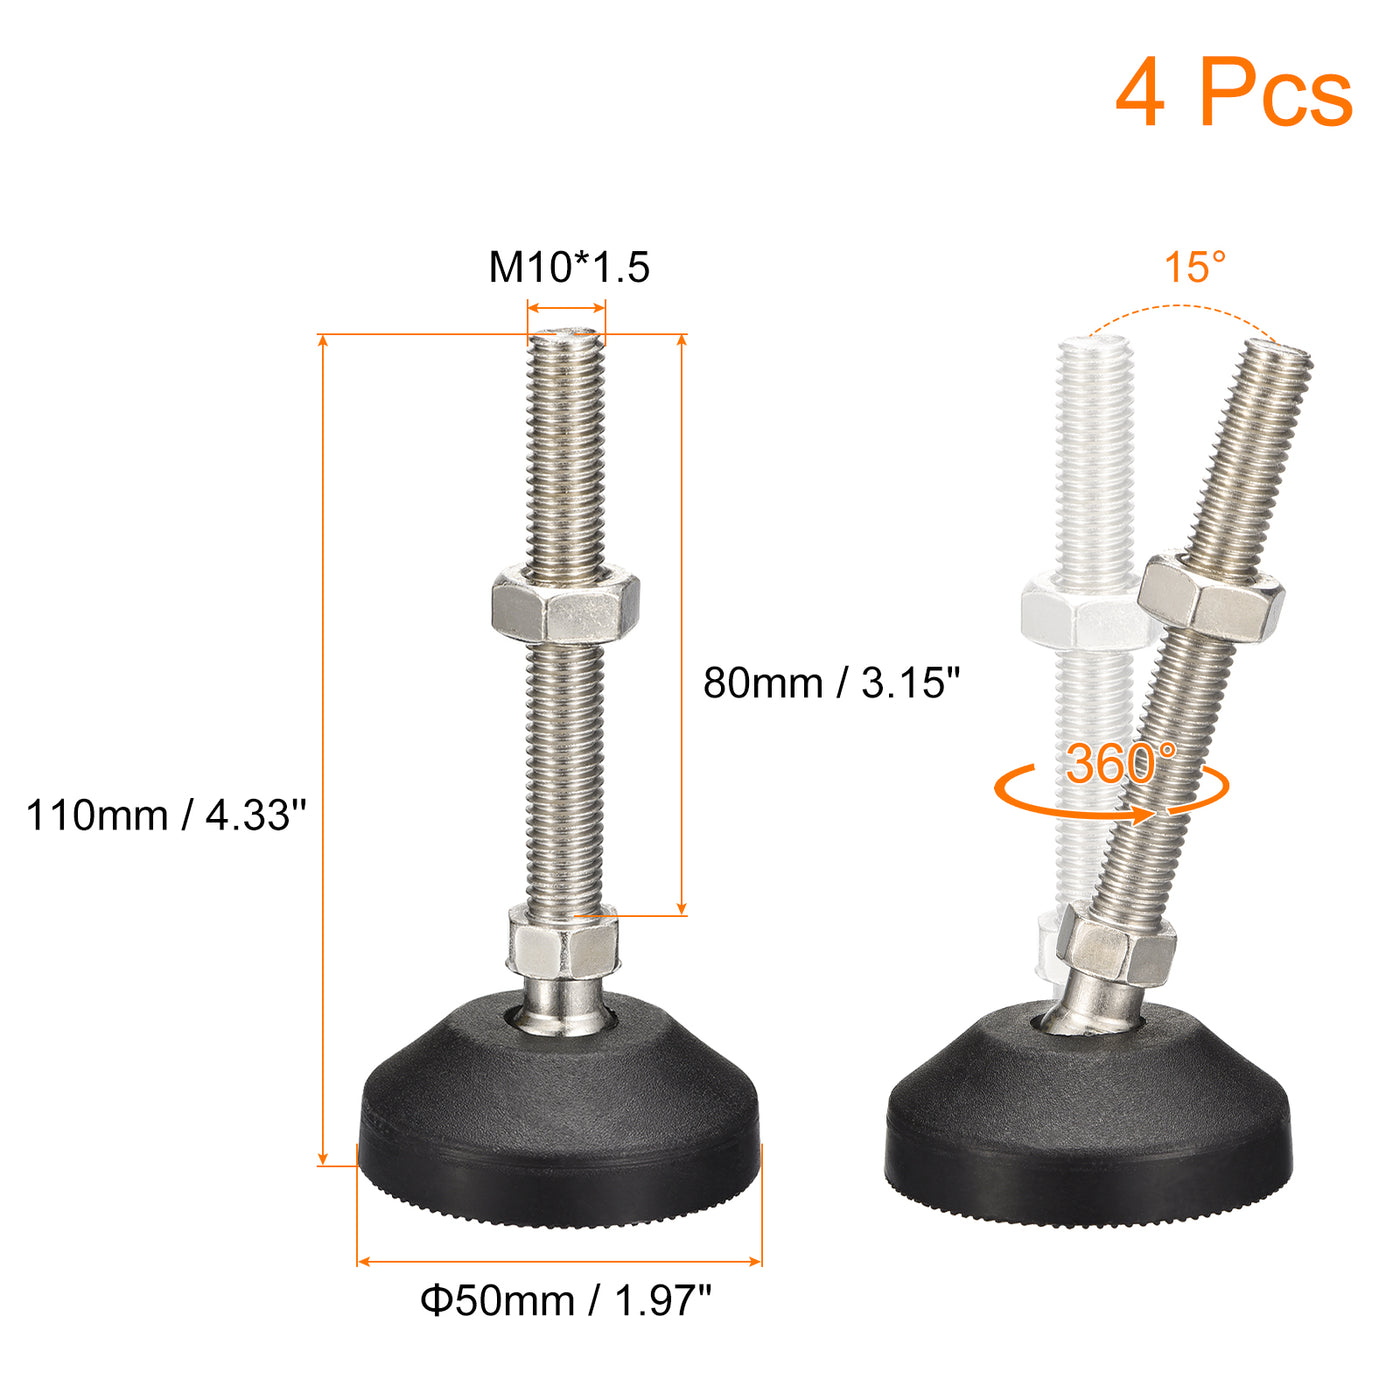 uxcell Uxcell Furniture Levelers, 4Pcs M10x80x50mm Nylon Universal Leveling Feet, Adjustable Swivel Table Feet for Furniture Workshop Machines Machinery Equipment